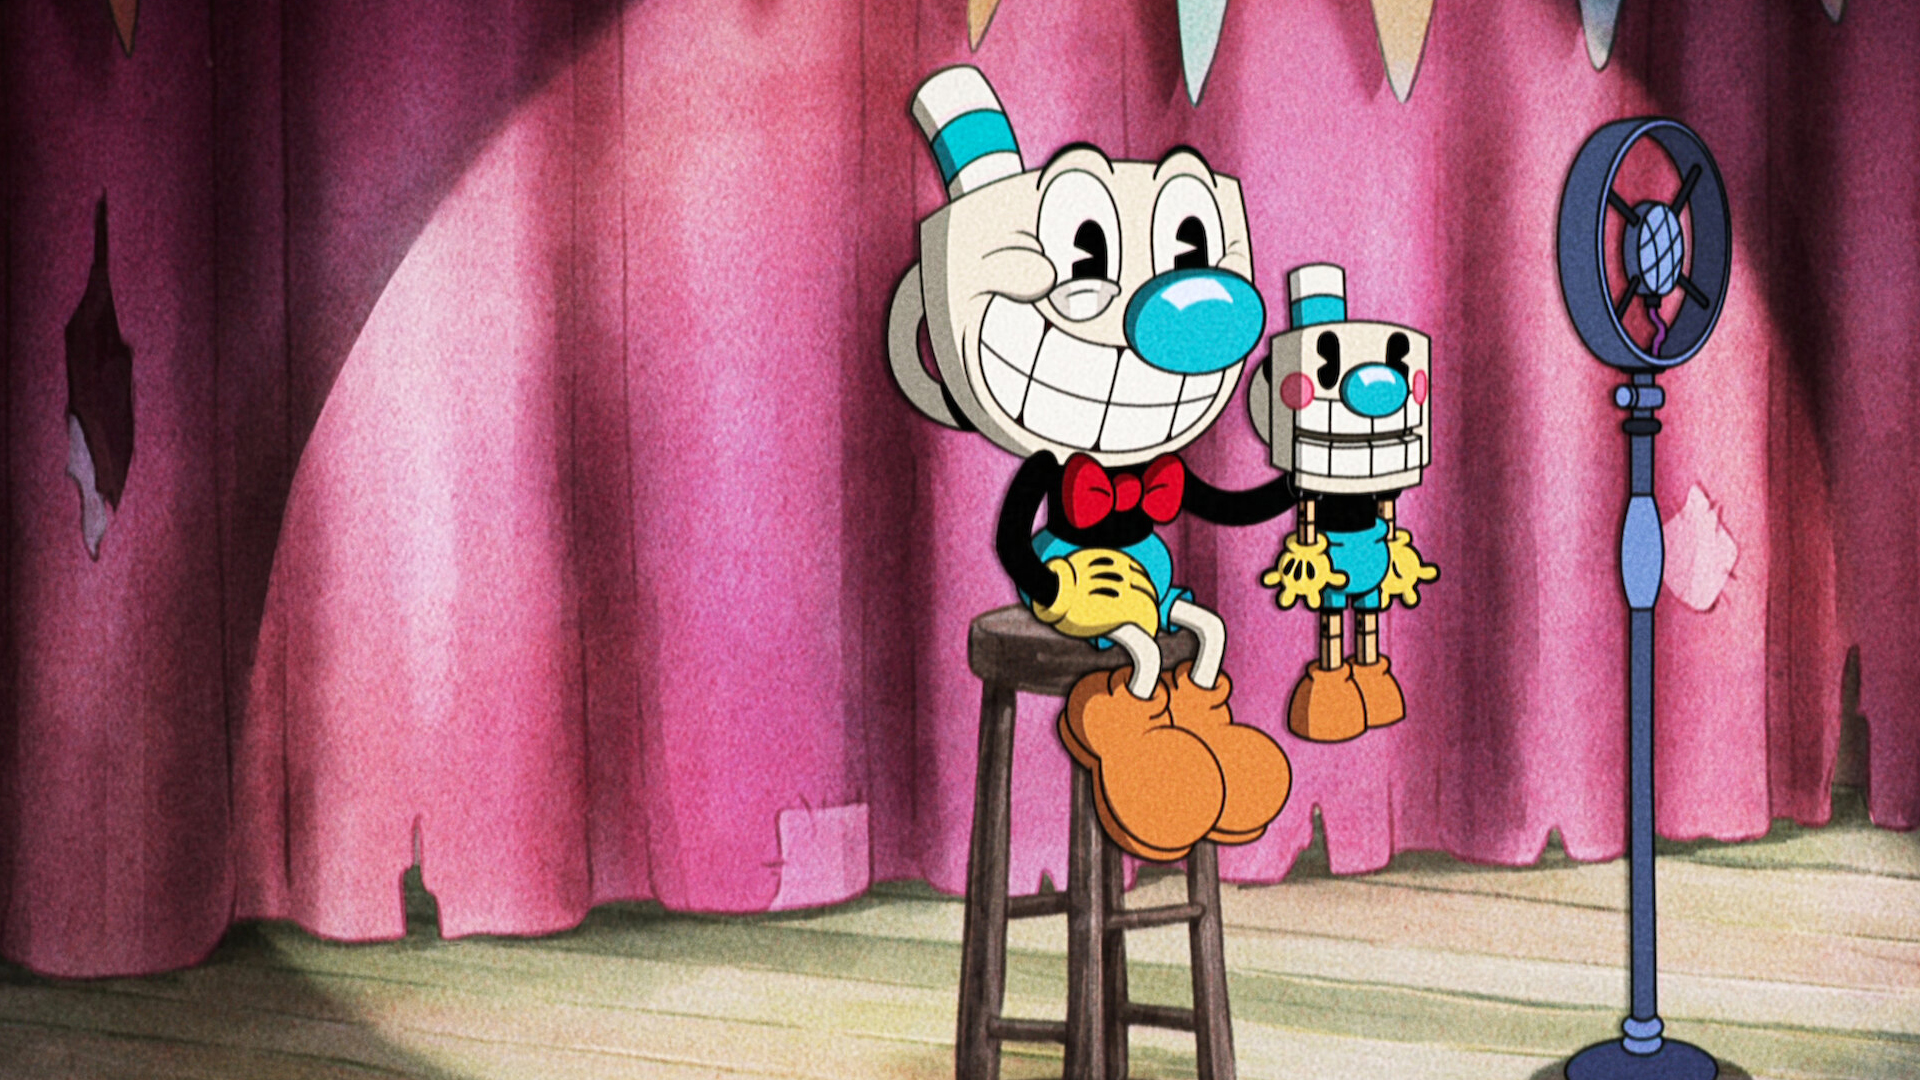 Is The Cuphead Show Season 4 Renewed or Cancelled?